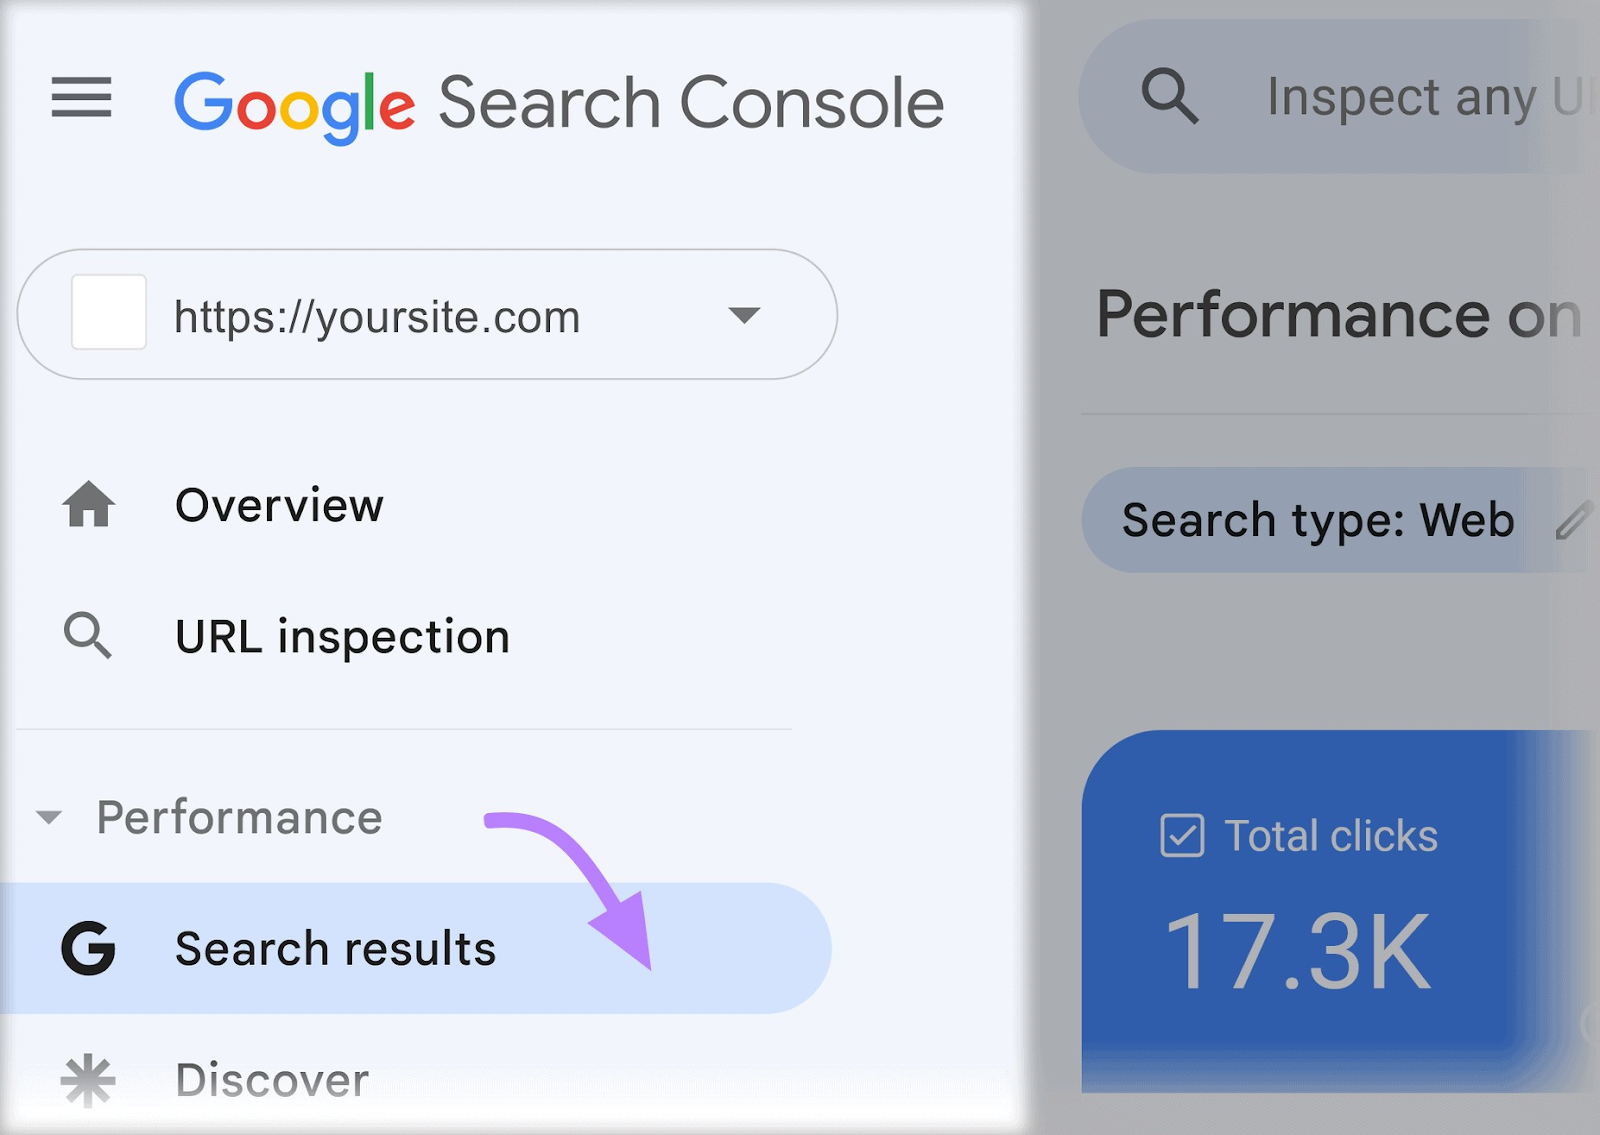 “Search results” selected under the “Performance” tab